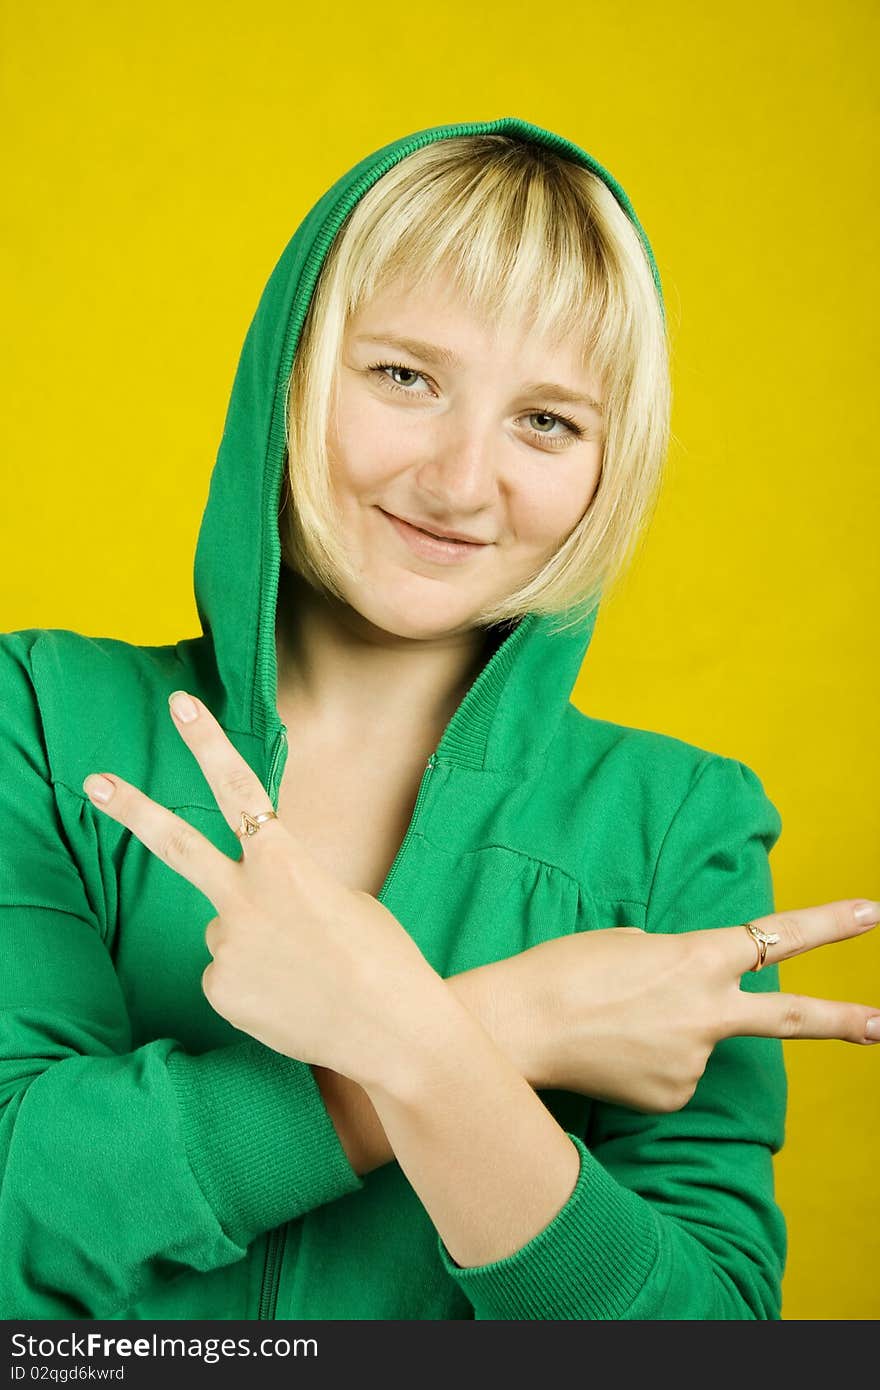 Blonde woman on a yellow background shows the sign of Peace. In the green jacket and hood. Blonde woman on a yellow background shows the sign of Peace. In the green jacket and hood